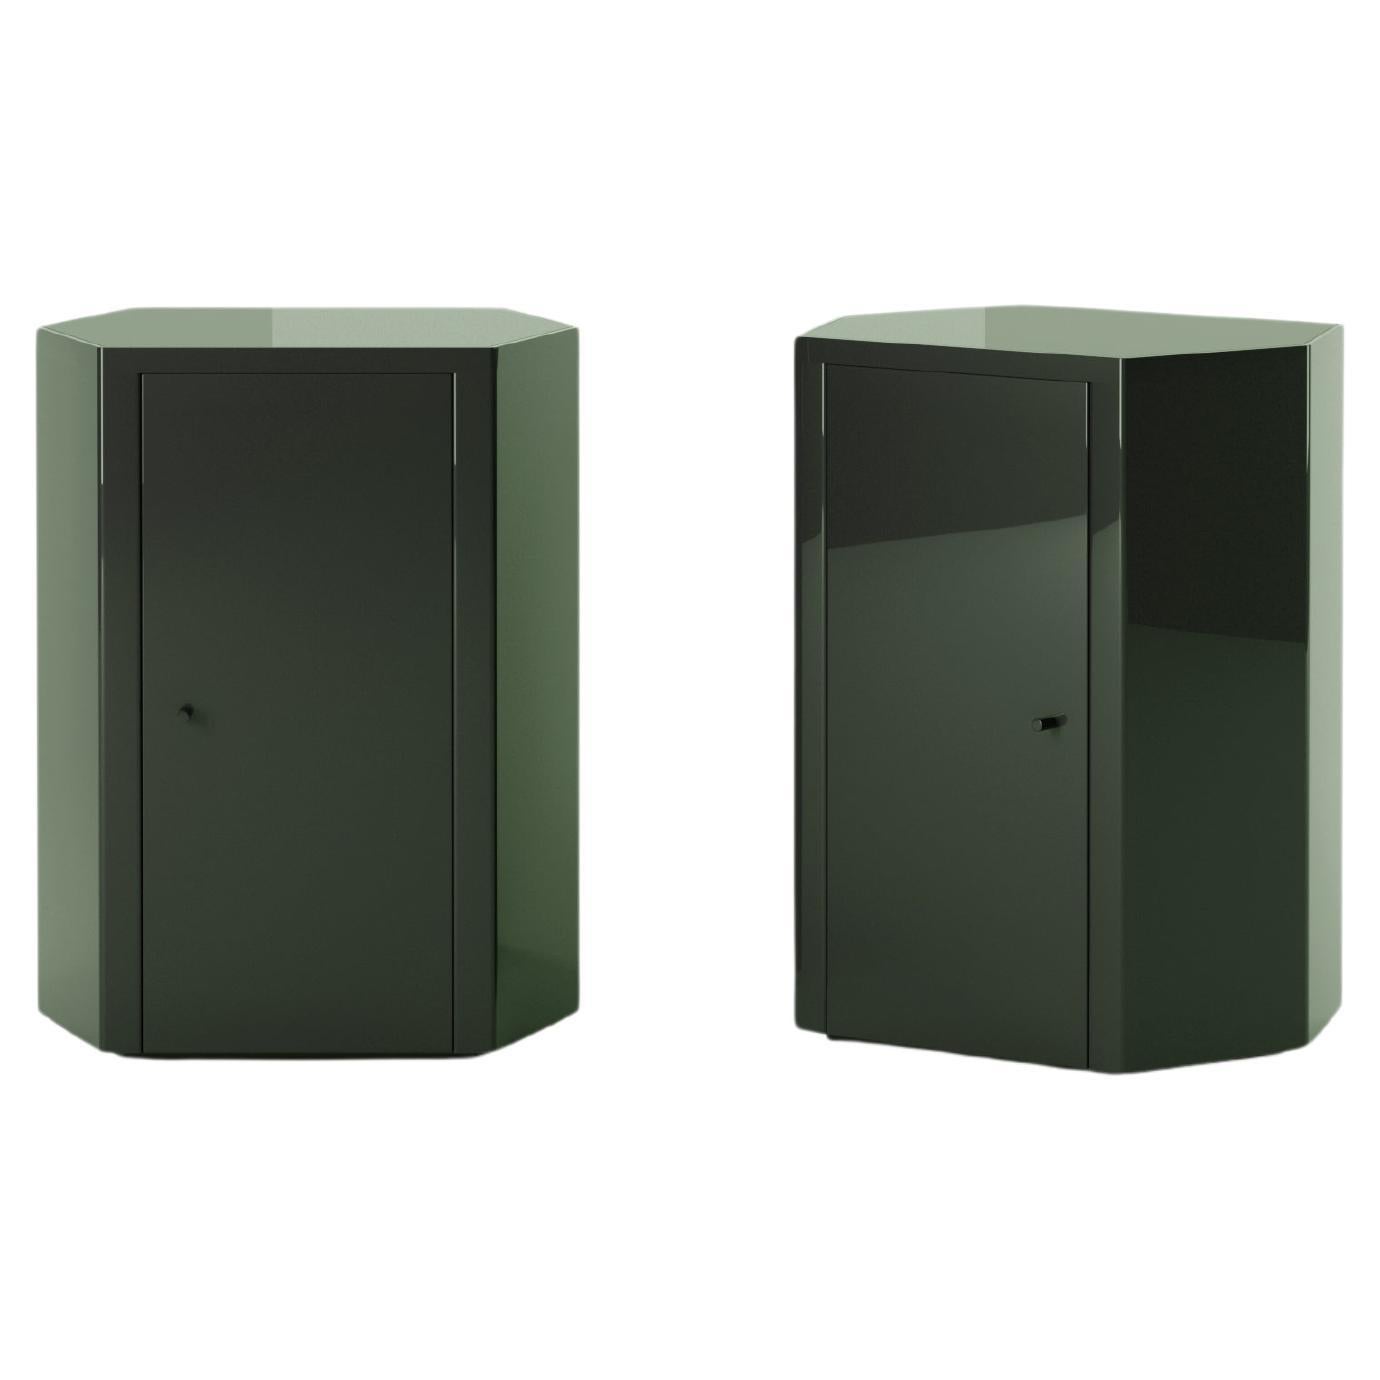 Pair of Park Night Stands in Forest Green Lacquer by Yaniv Chen for Lemon For Sale